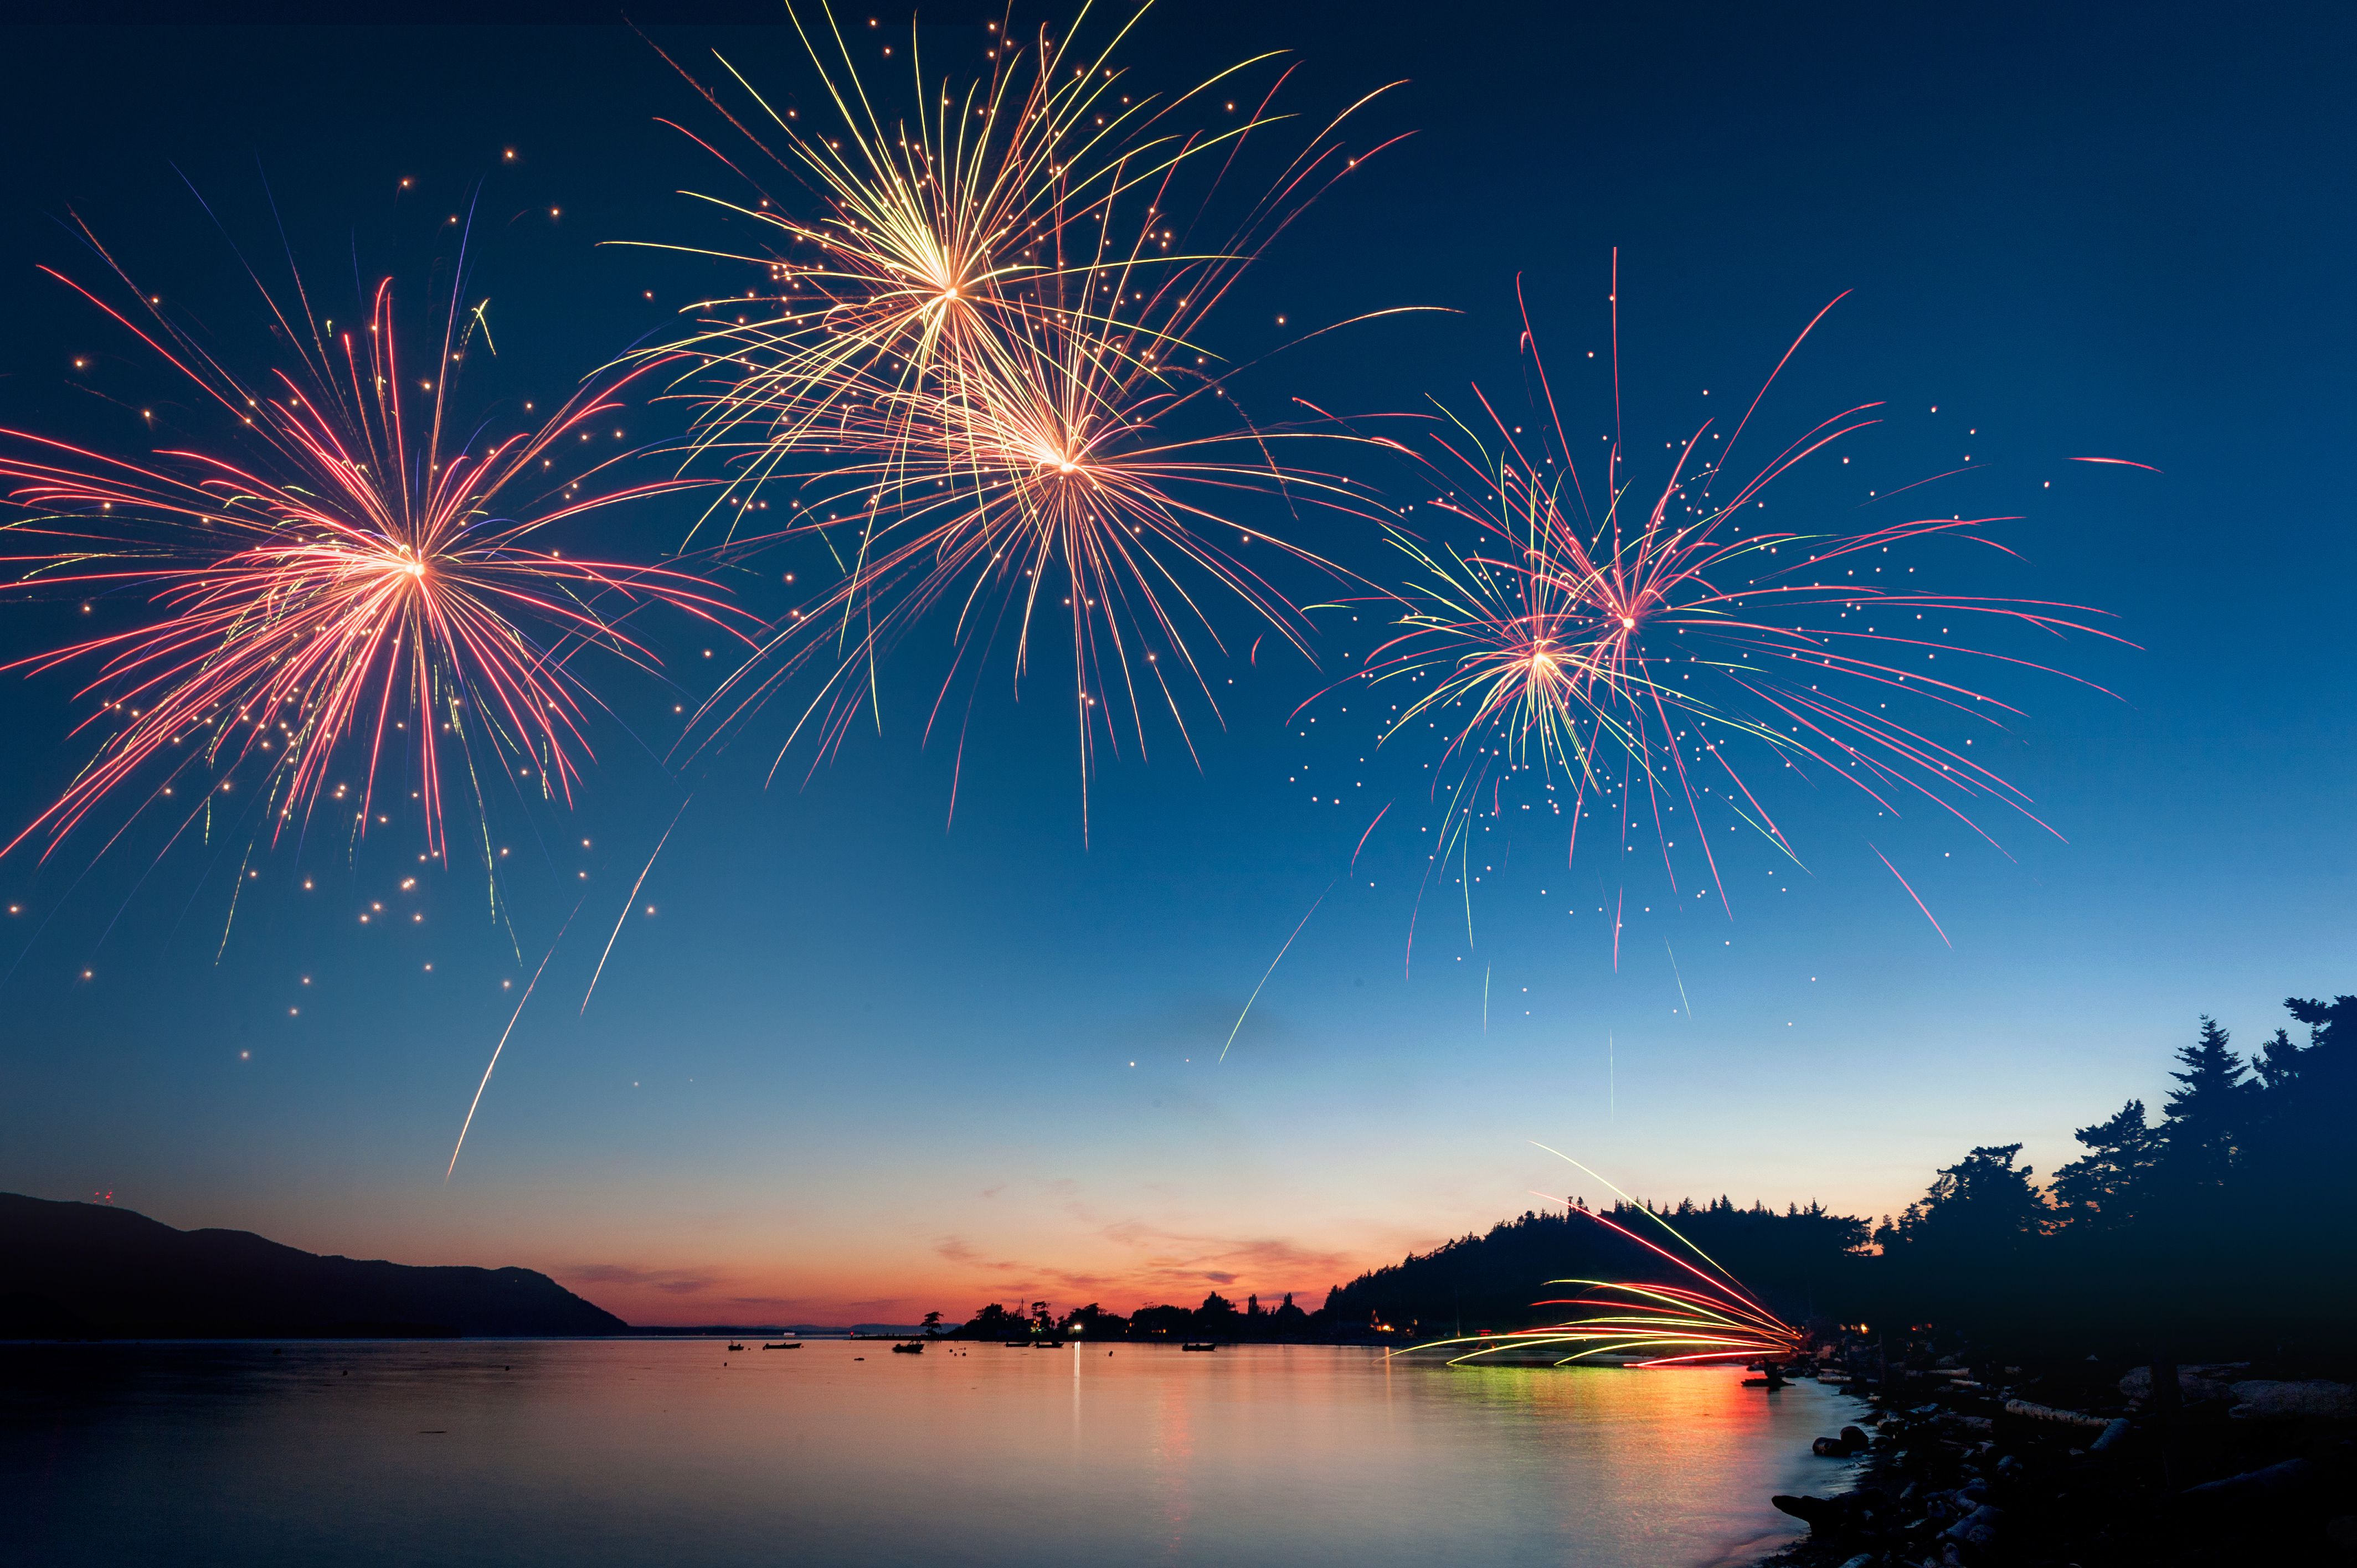 Names and Functions of Chemical Elements in Fireworks